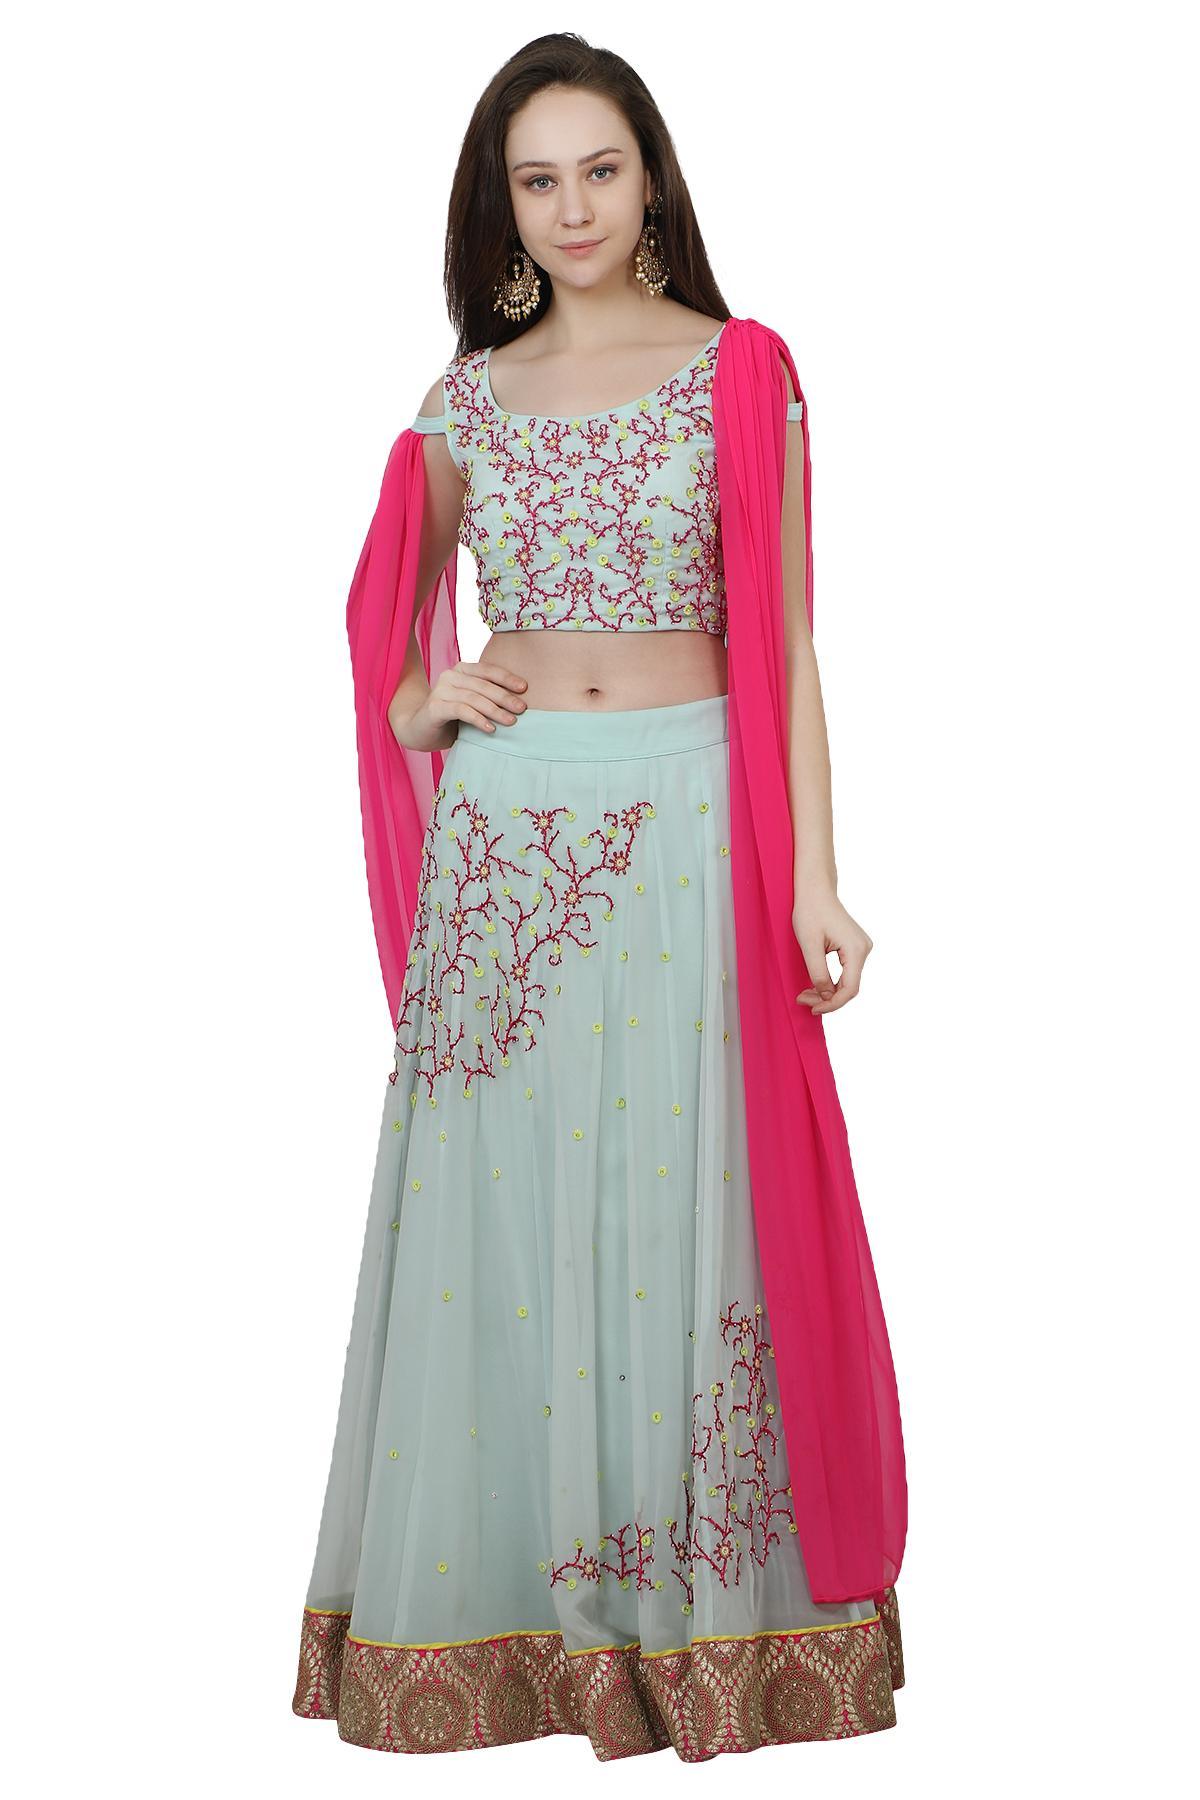 Occasion Wear Embroidered Pink And Sky Blue Color Sharara Top Lehenga In  Net Fabric